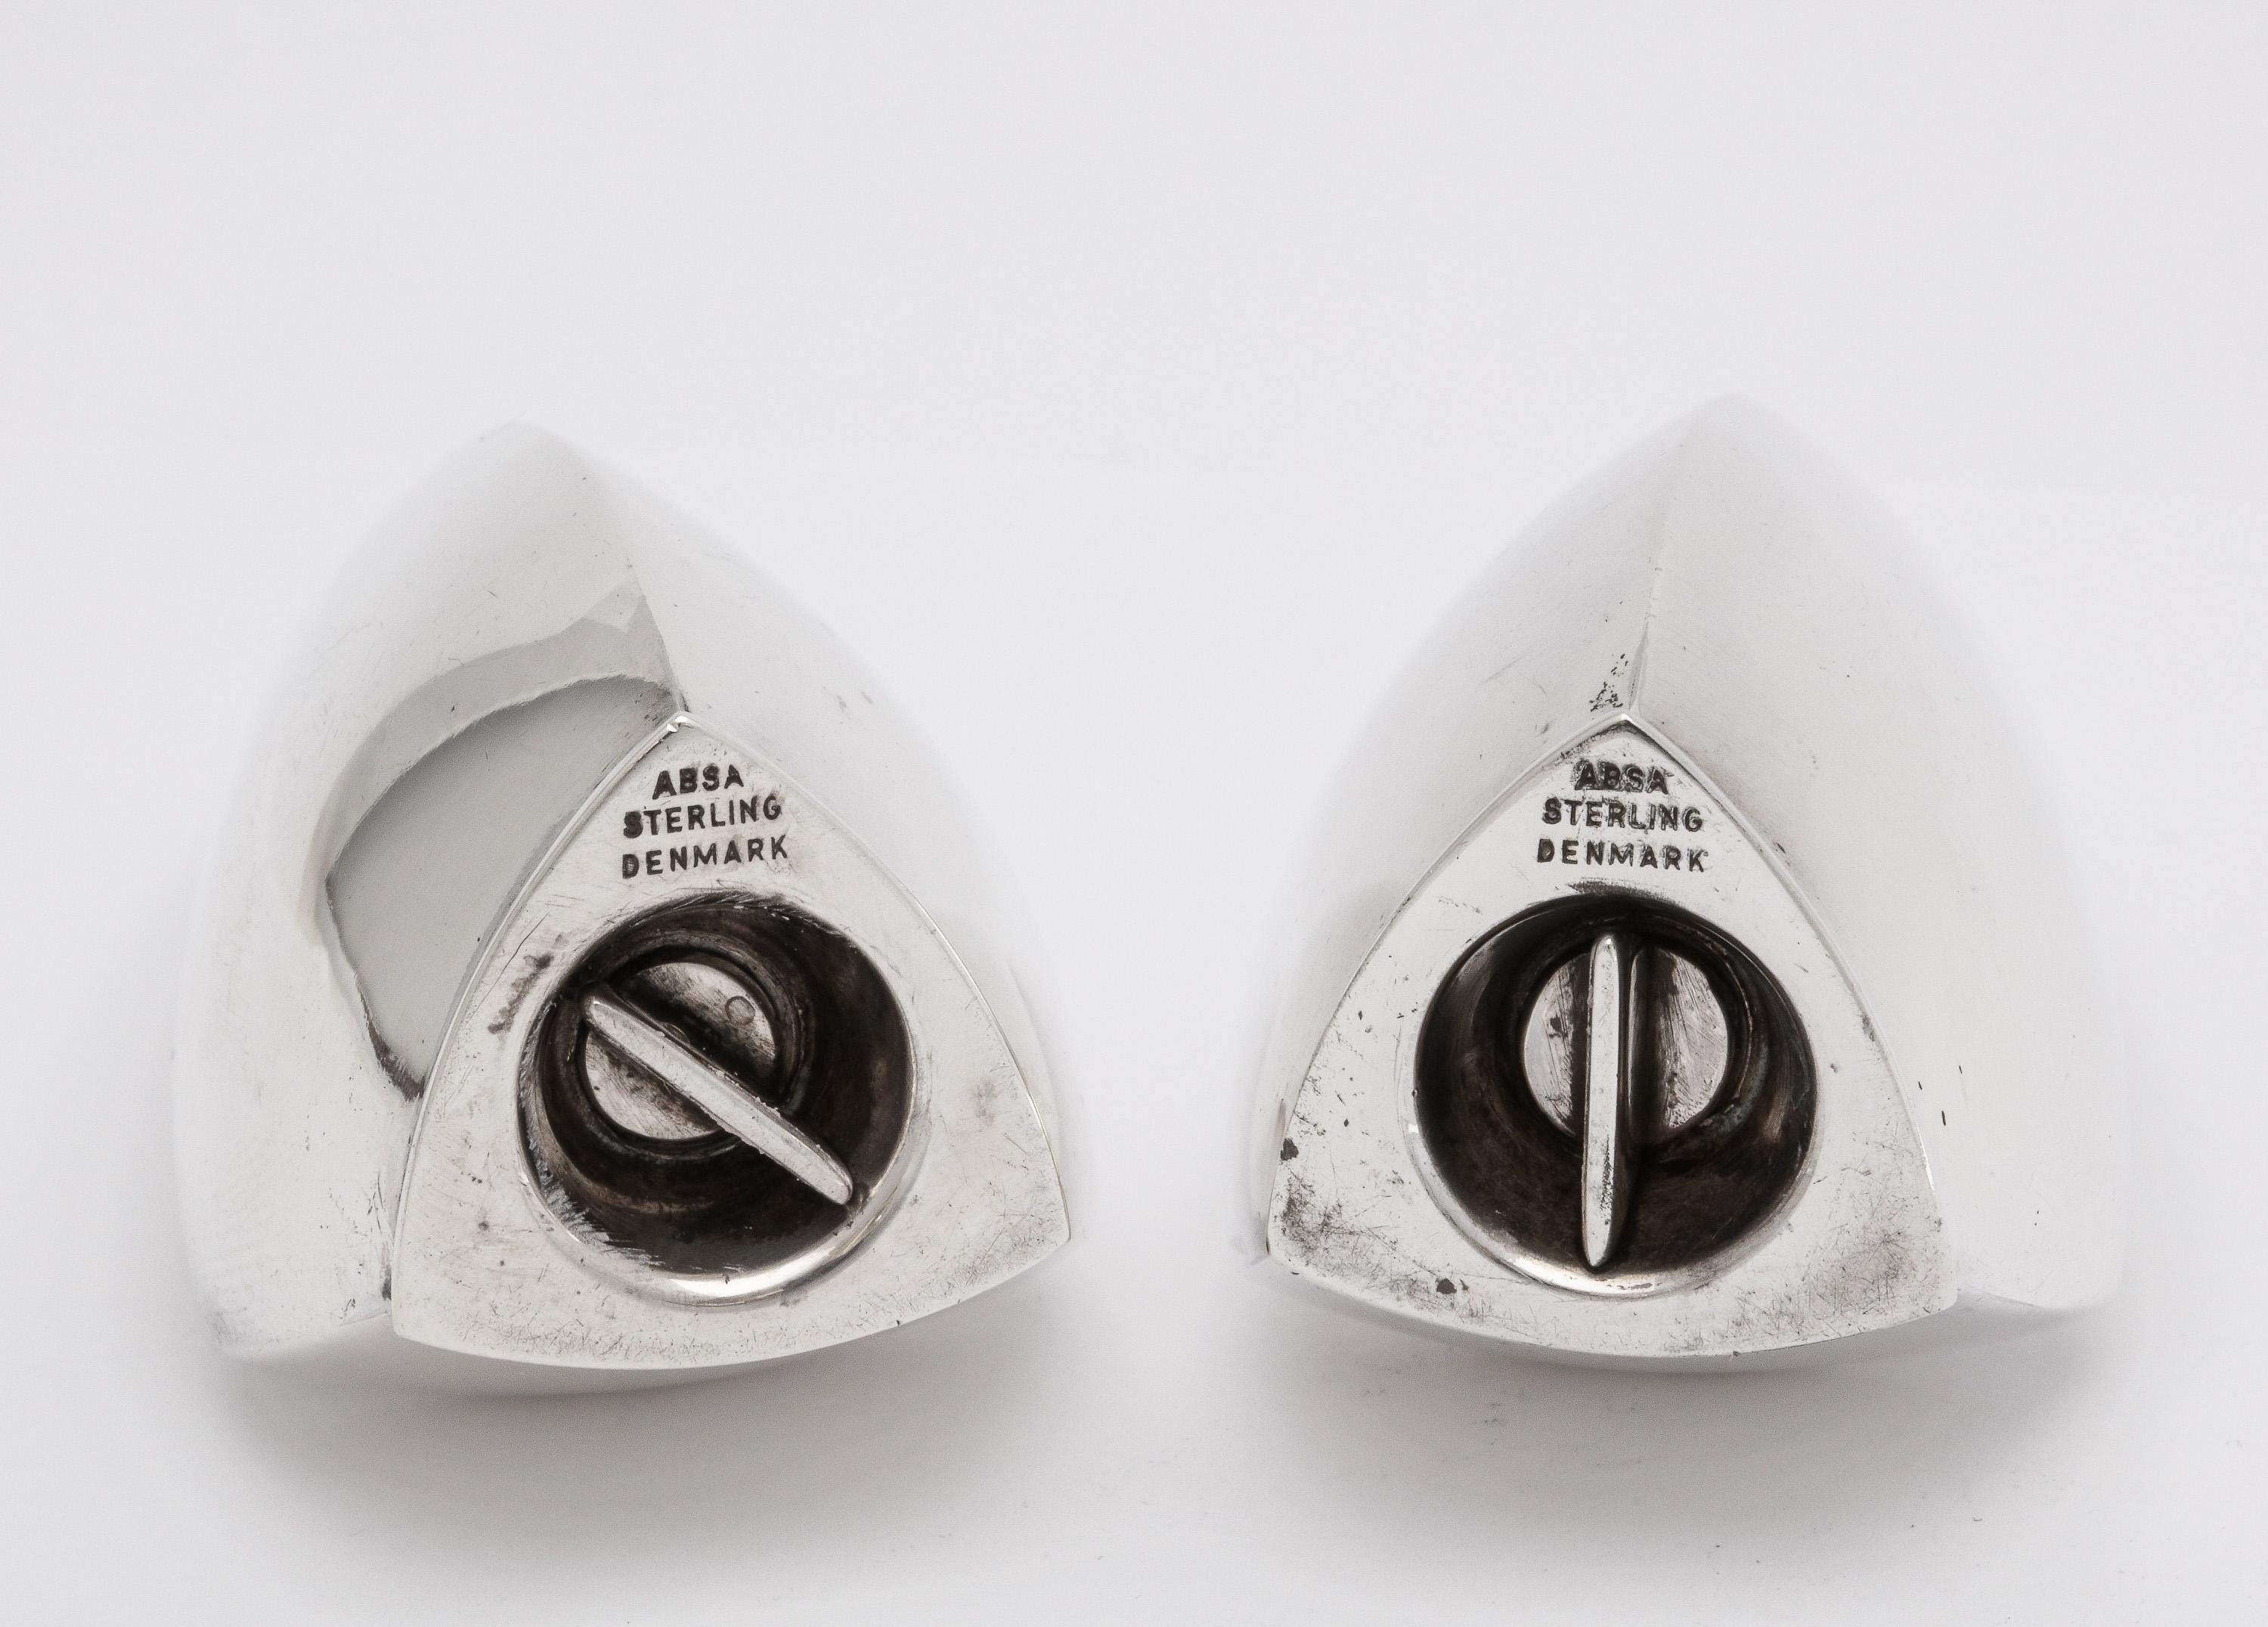 Mid-Century Modern Pair of Danish Sterling Silver Salt and Pepper Shakers, ABSA For Sale 2